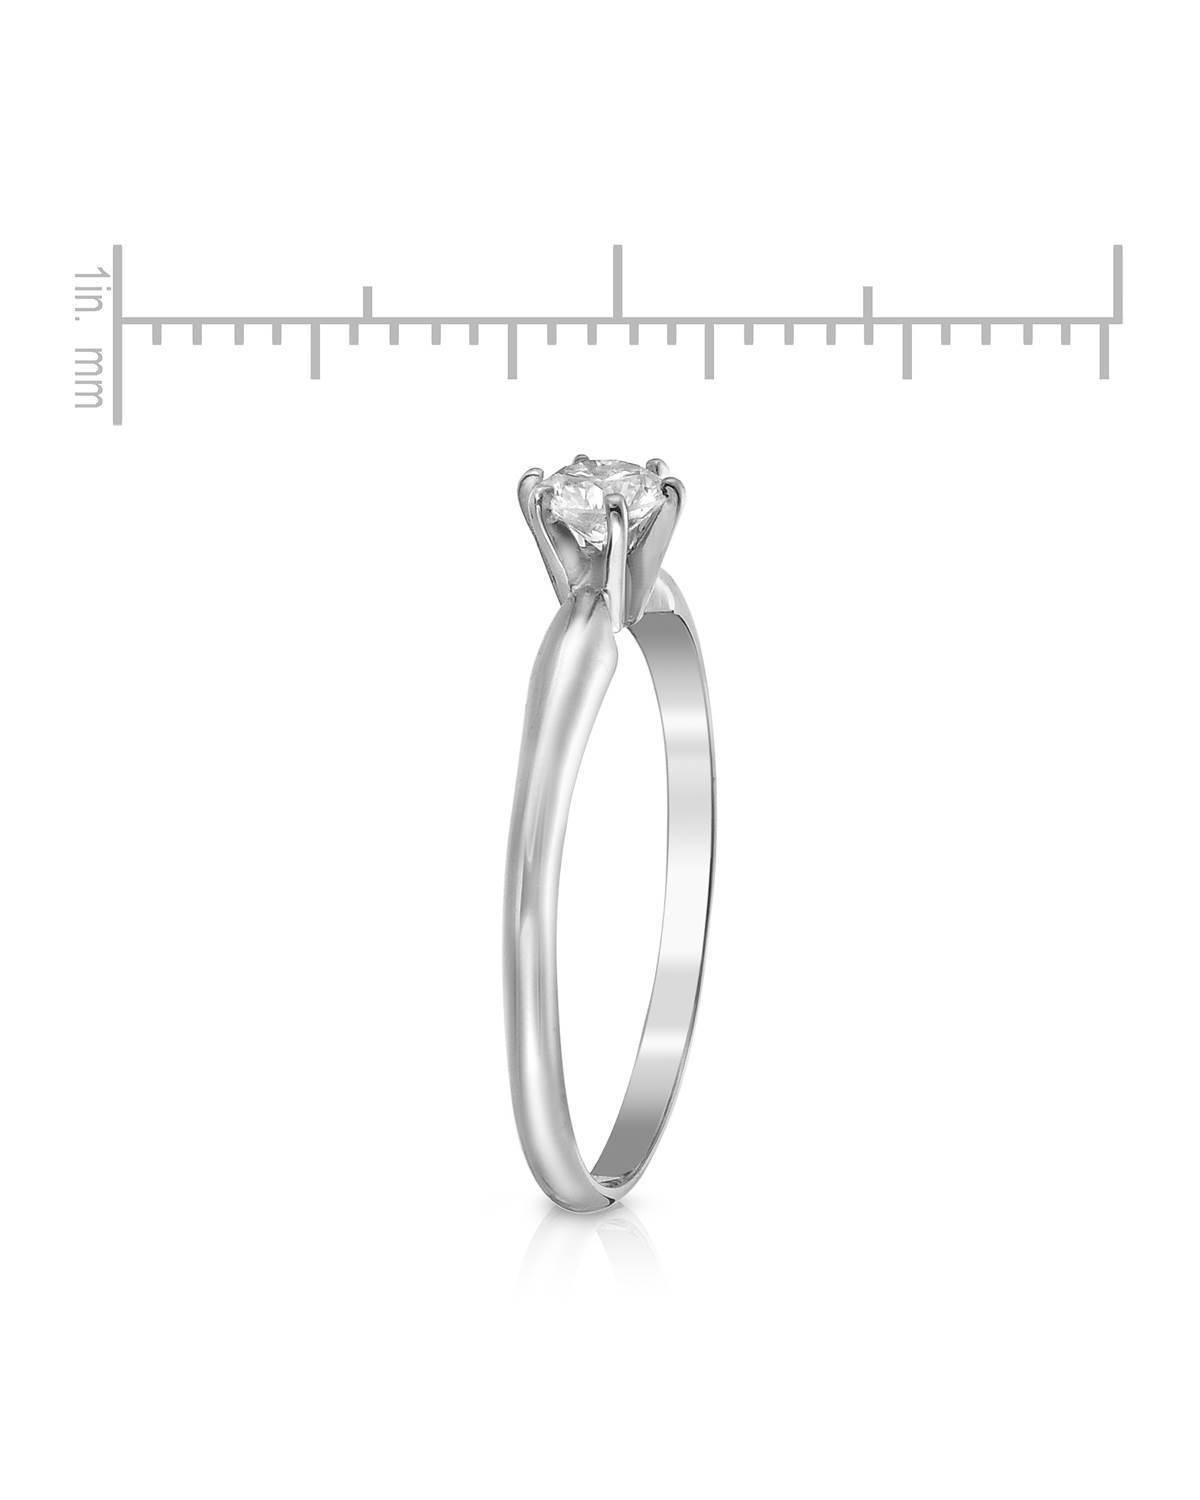 Splendid 0.25 Carats Diamond 14K Solid White Gold Ring

Suggested Replacement Value: Approx. $1,900.00

Stamped: 14K

Total Round Cut Diamond Weight: Approx. 0.25 Carats (color H / Clarity SI1)

Diamond Treatment: None

Ring size: 6.5 (we offer free